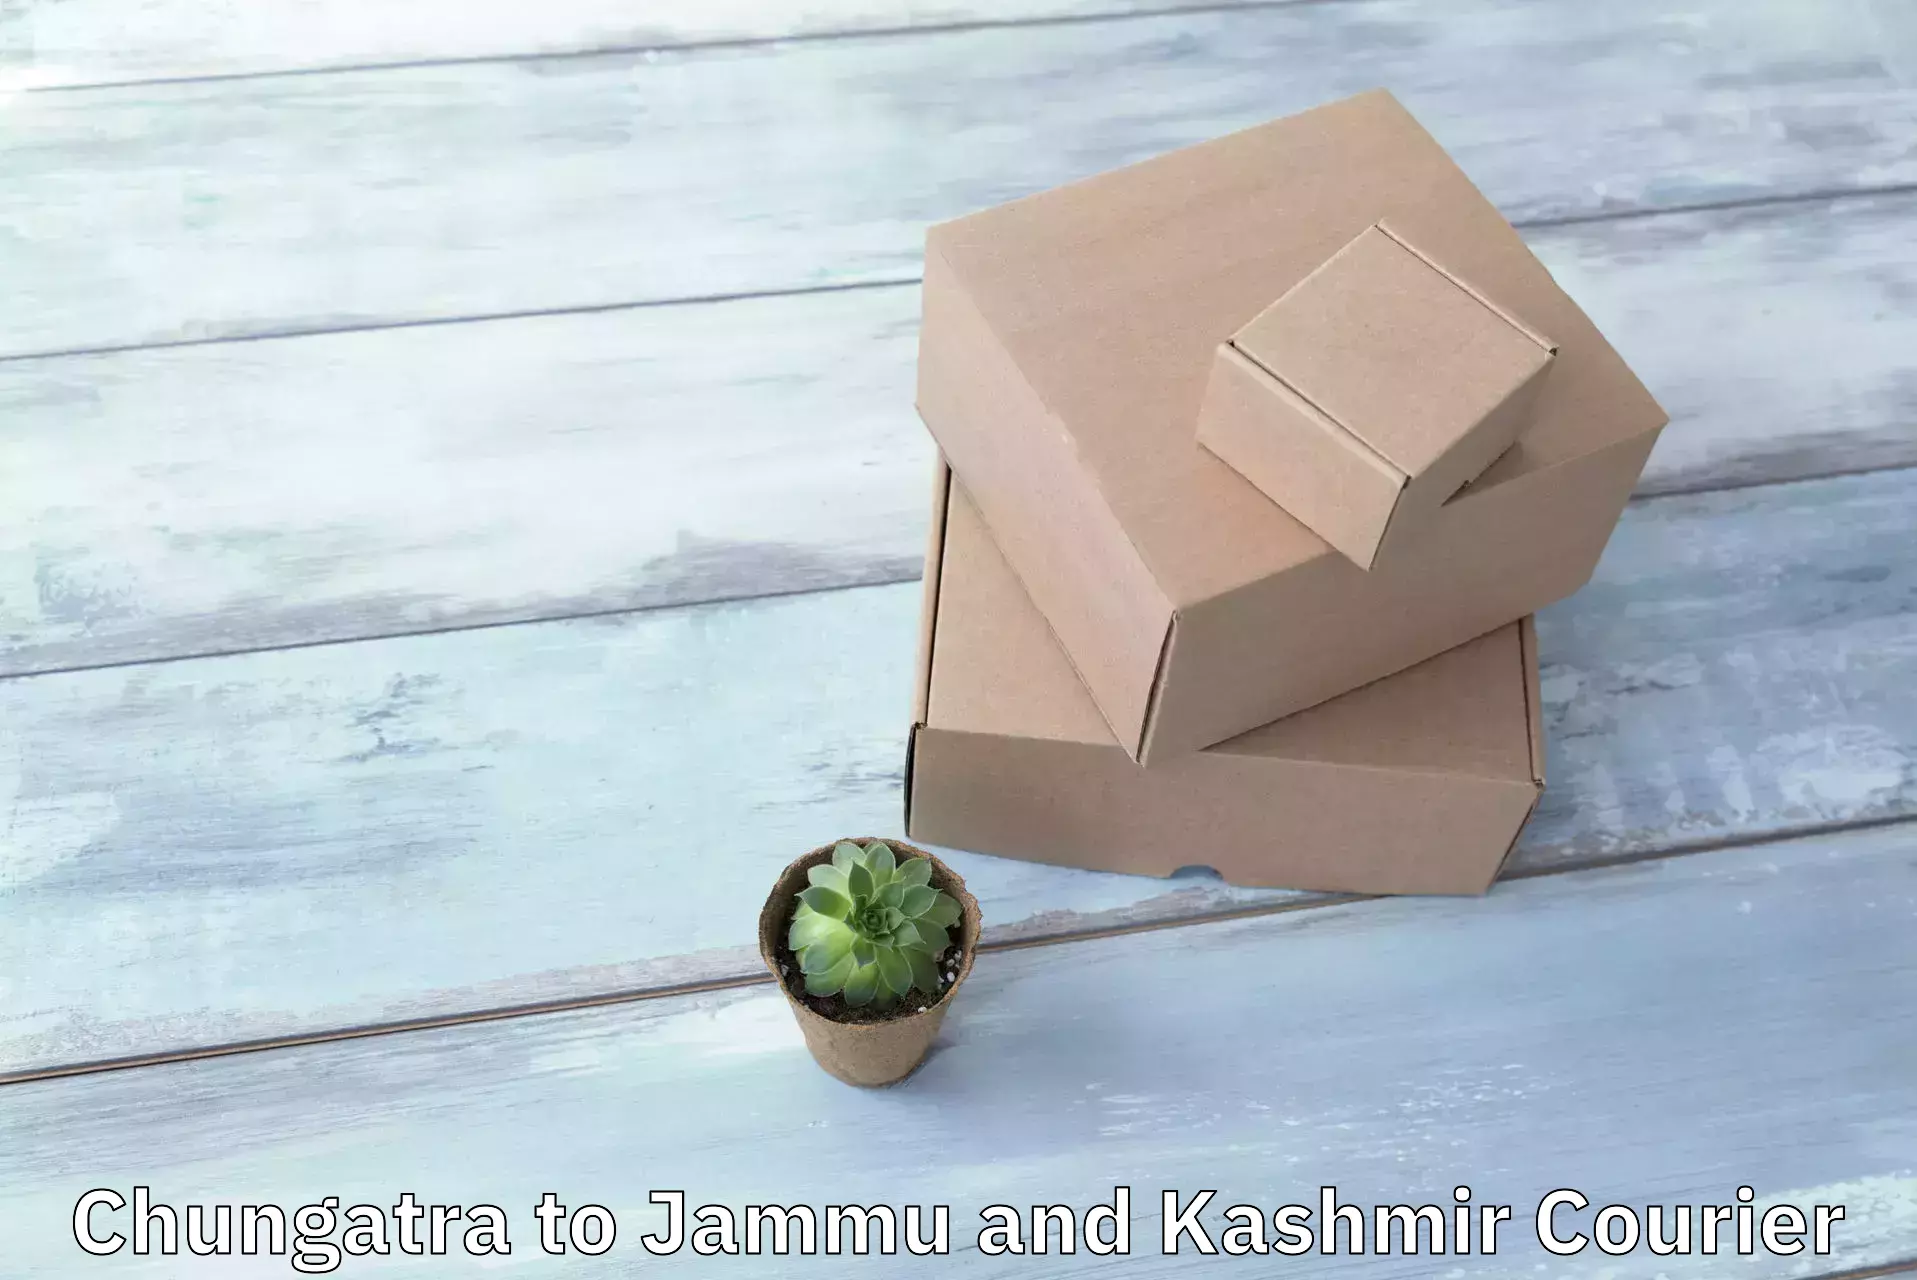 Parcel handling and care in Chungatra to Pulwama